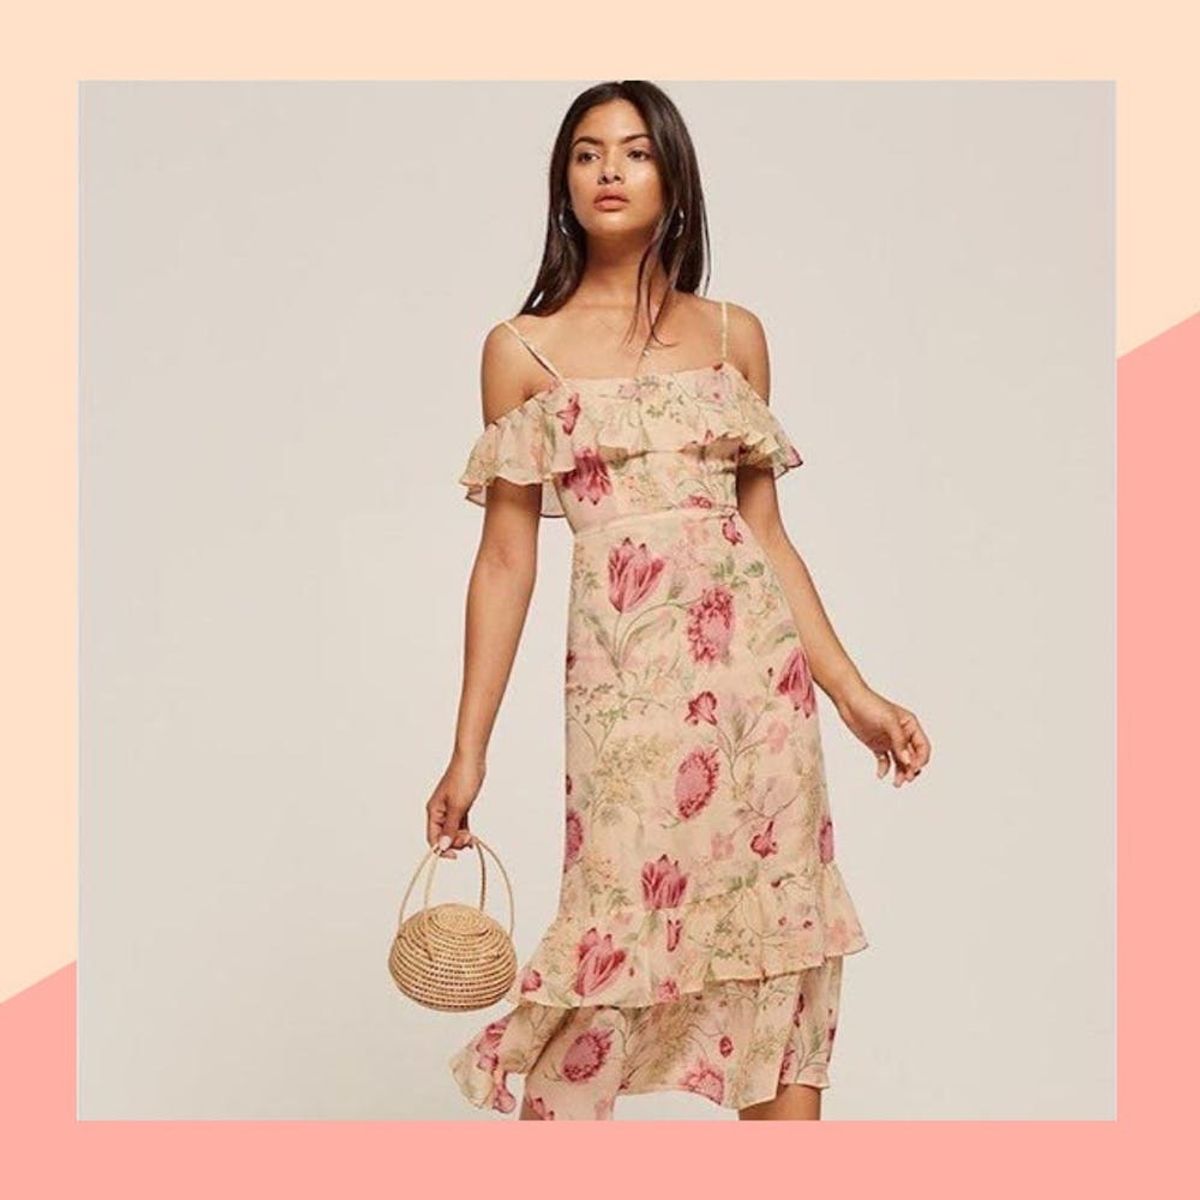 8 Dresses to Wear to Every Type of Wedding This Season